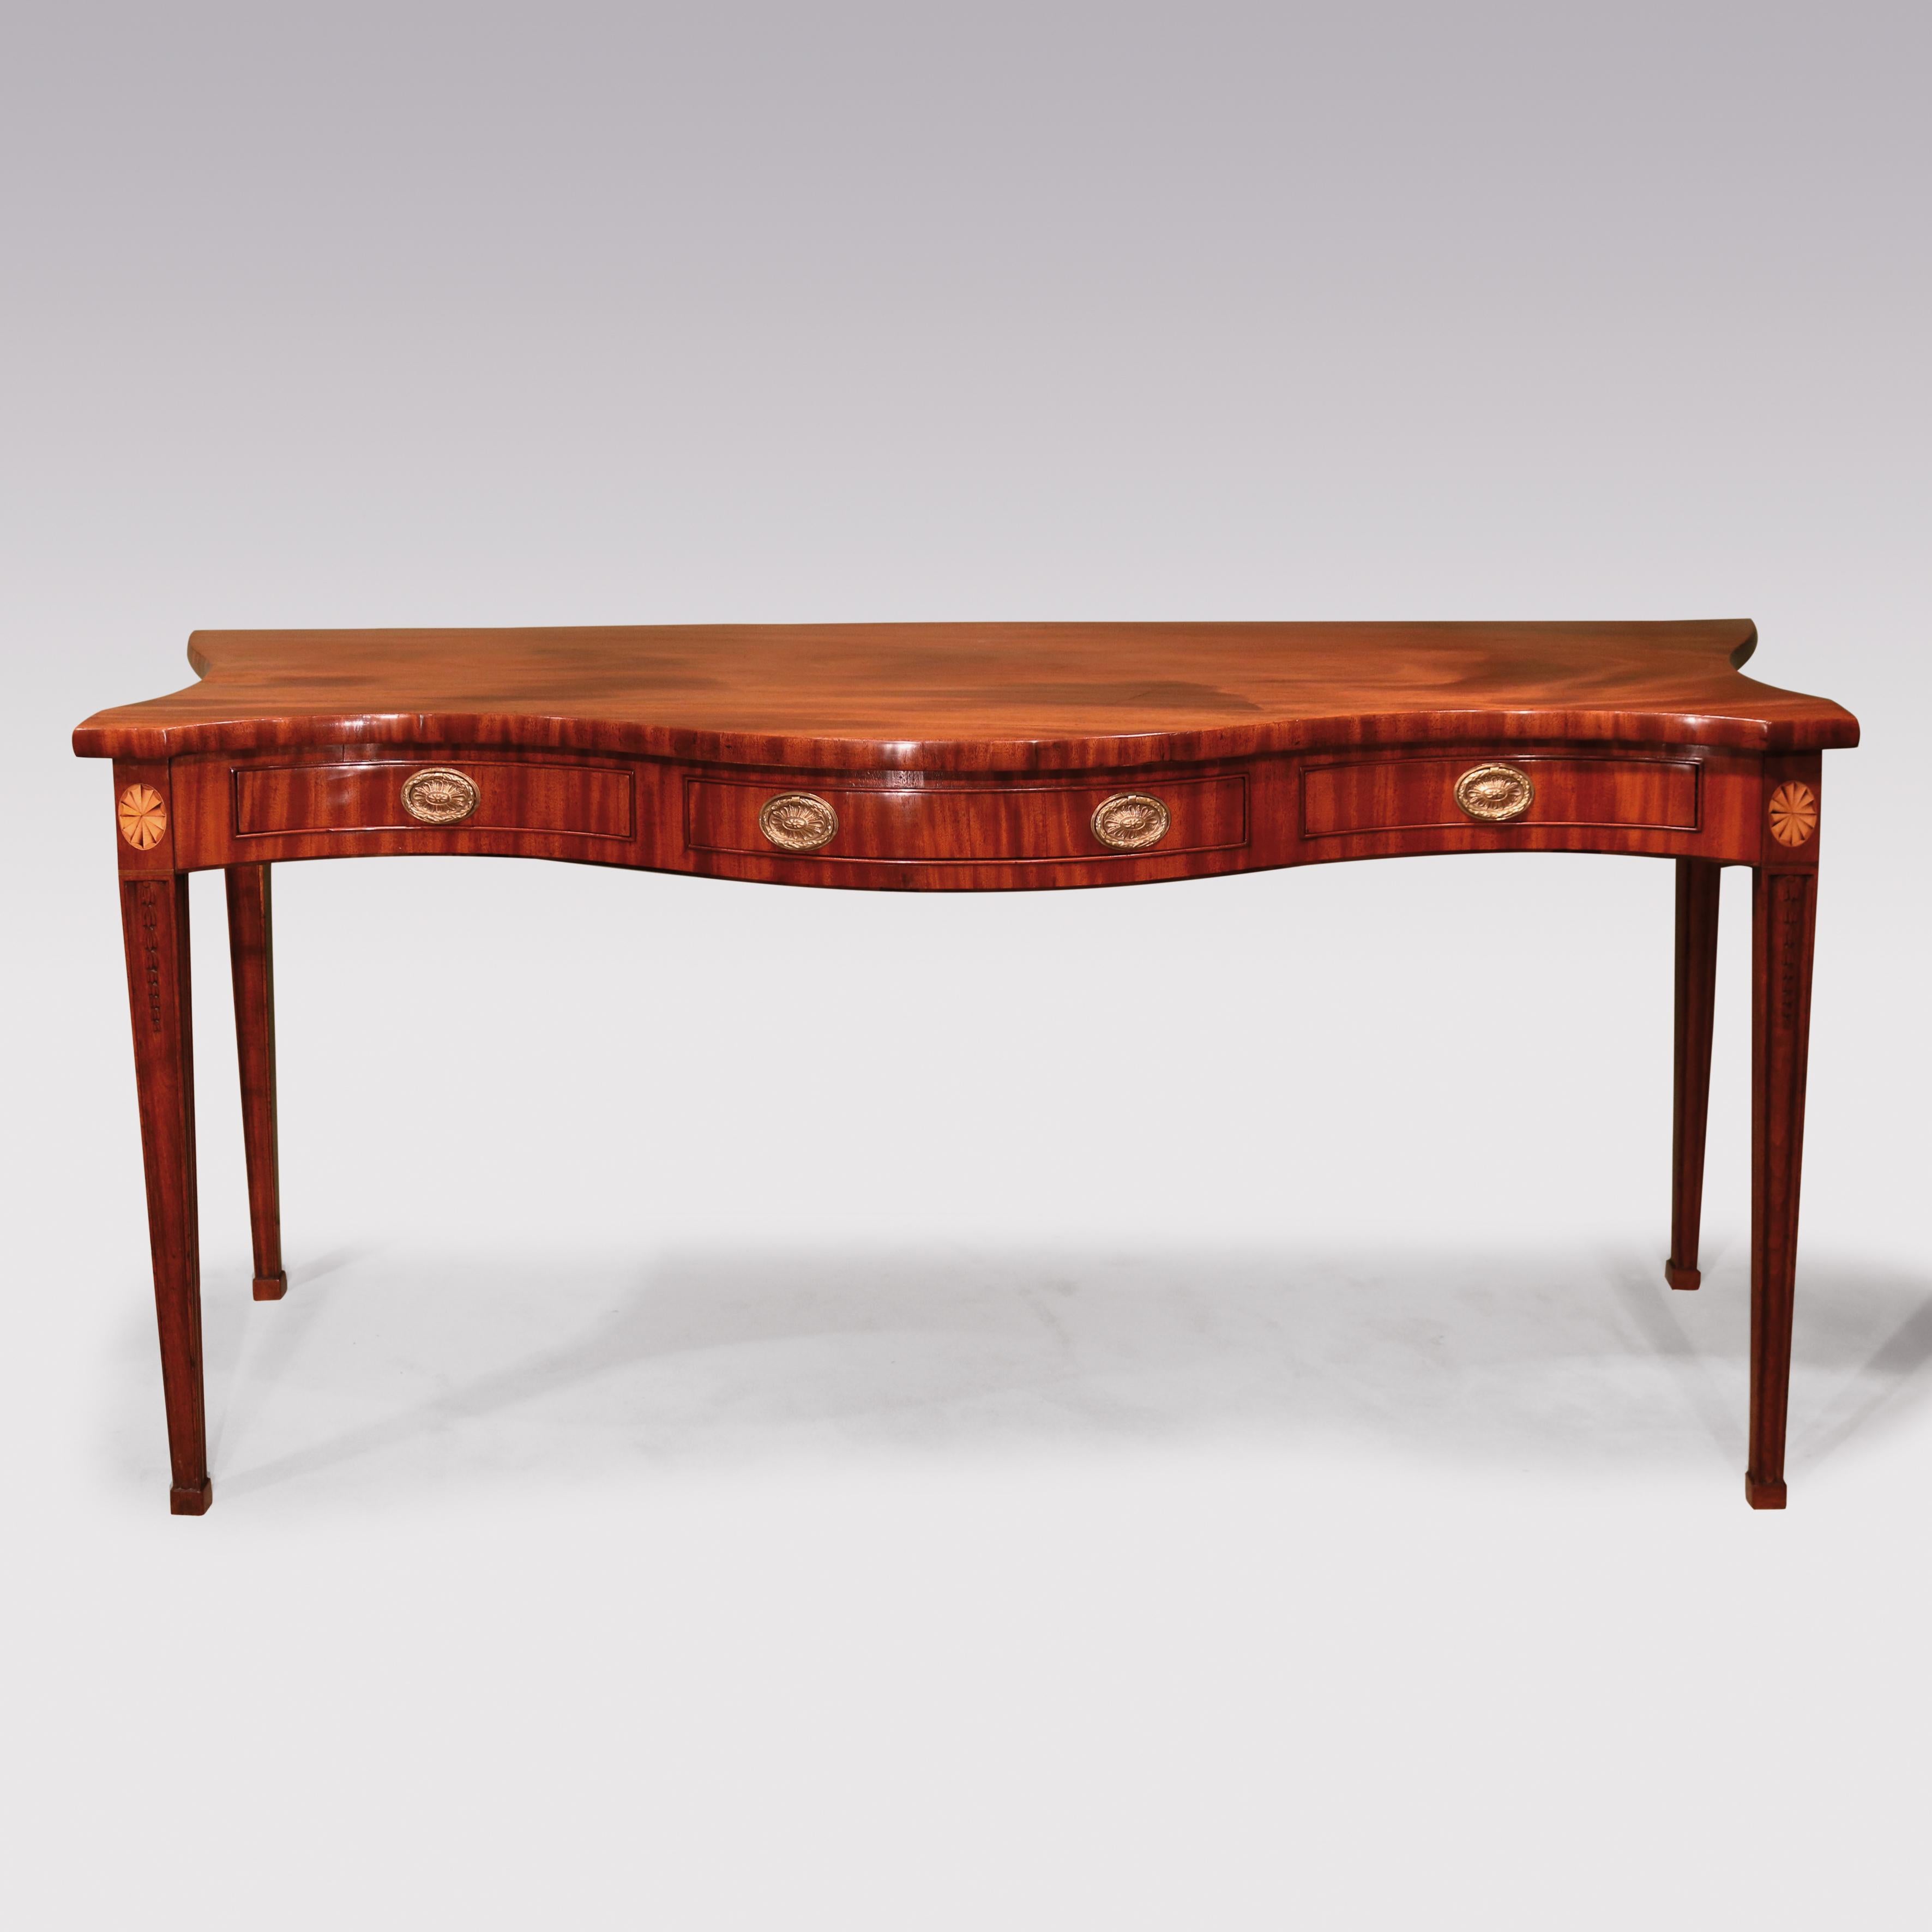 A fine quality late 18th century Sheraton period figured mahogany serving table, having serpentine front and sides with 3 frieze drawers, supported on moulded square tapering legs with boxwood fan inlay and husk carving ending on block feet.